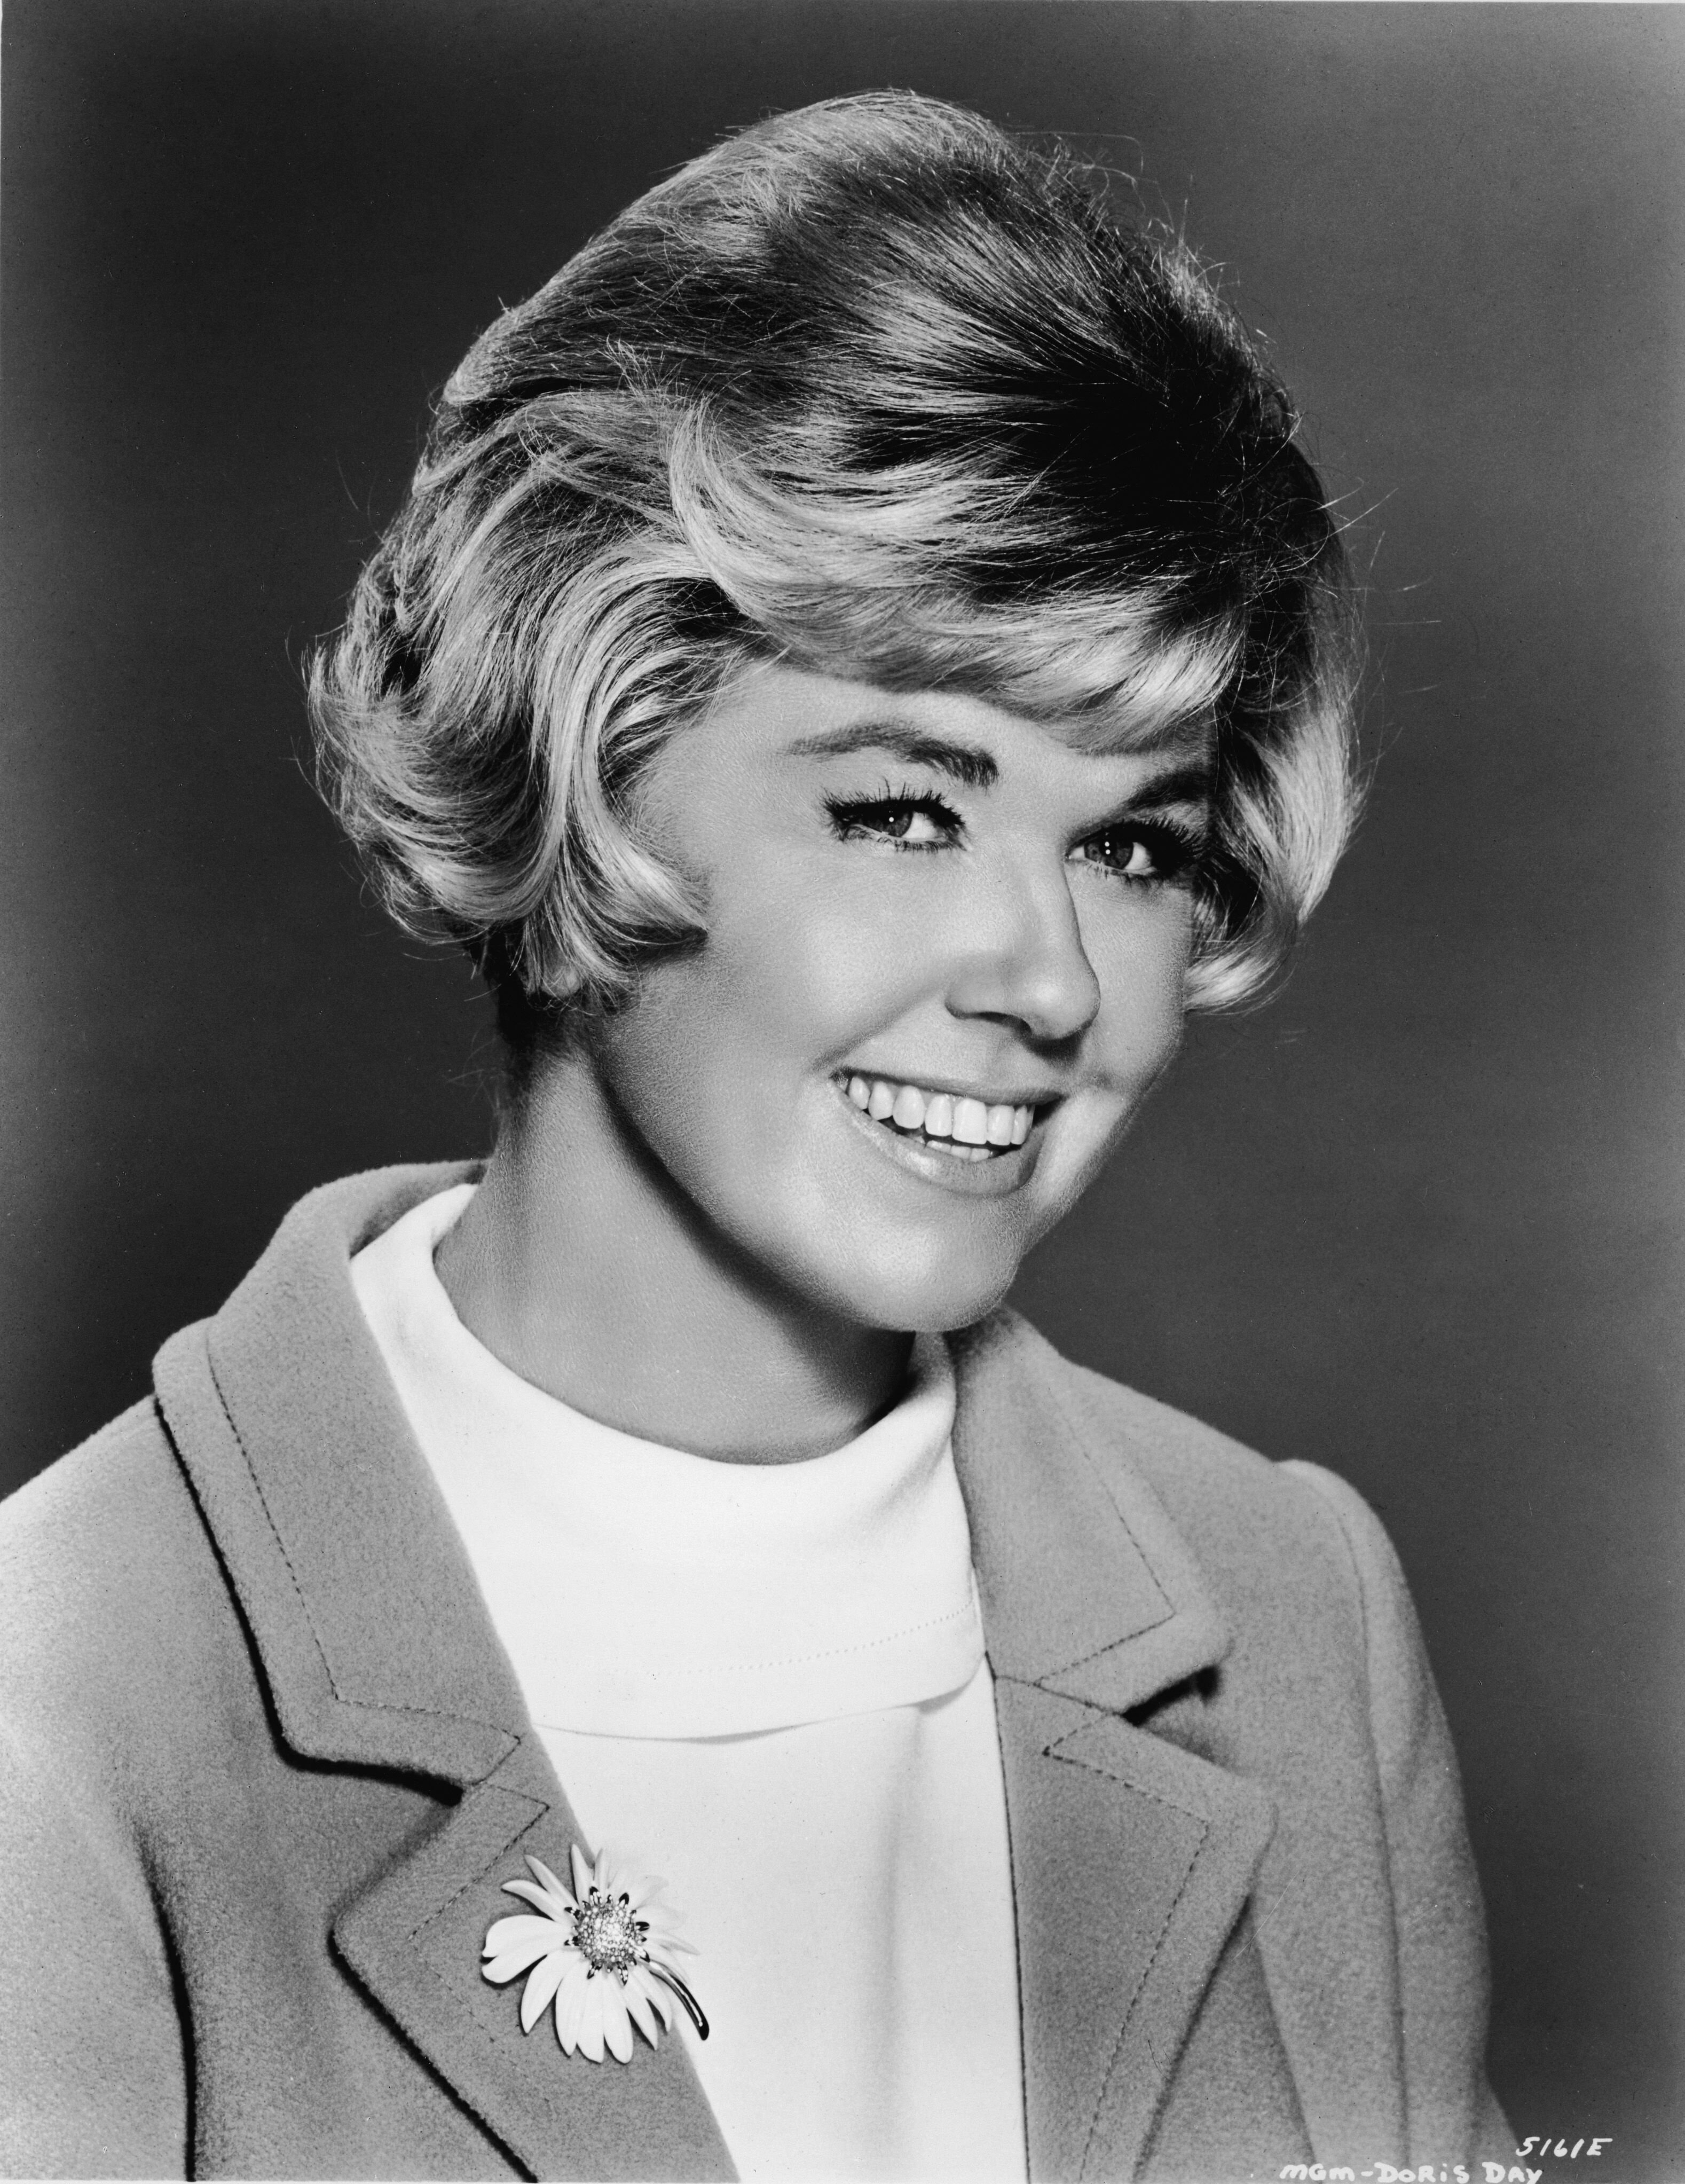 Legendary Doris Day Plans to Humbly Celebrate Her 97th Birthday with